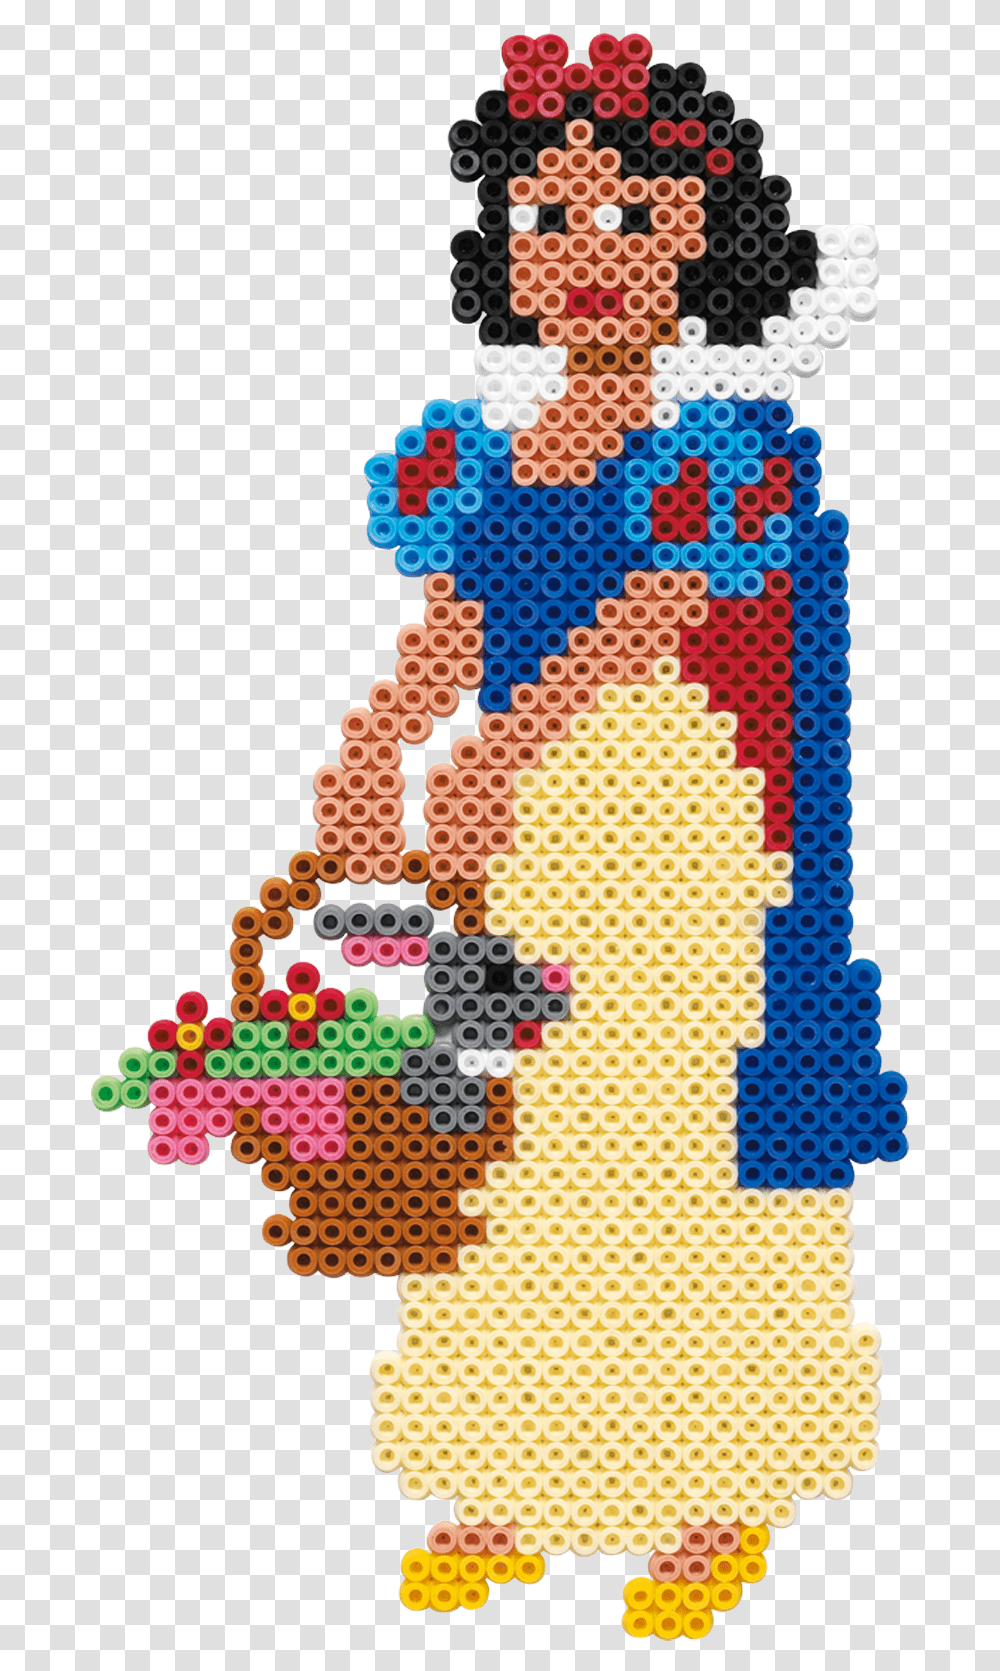 Blanche Neige En Perle A Repasser, Bead, Accessories, Collage Transparent Png